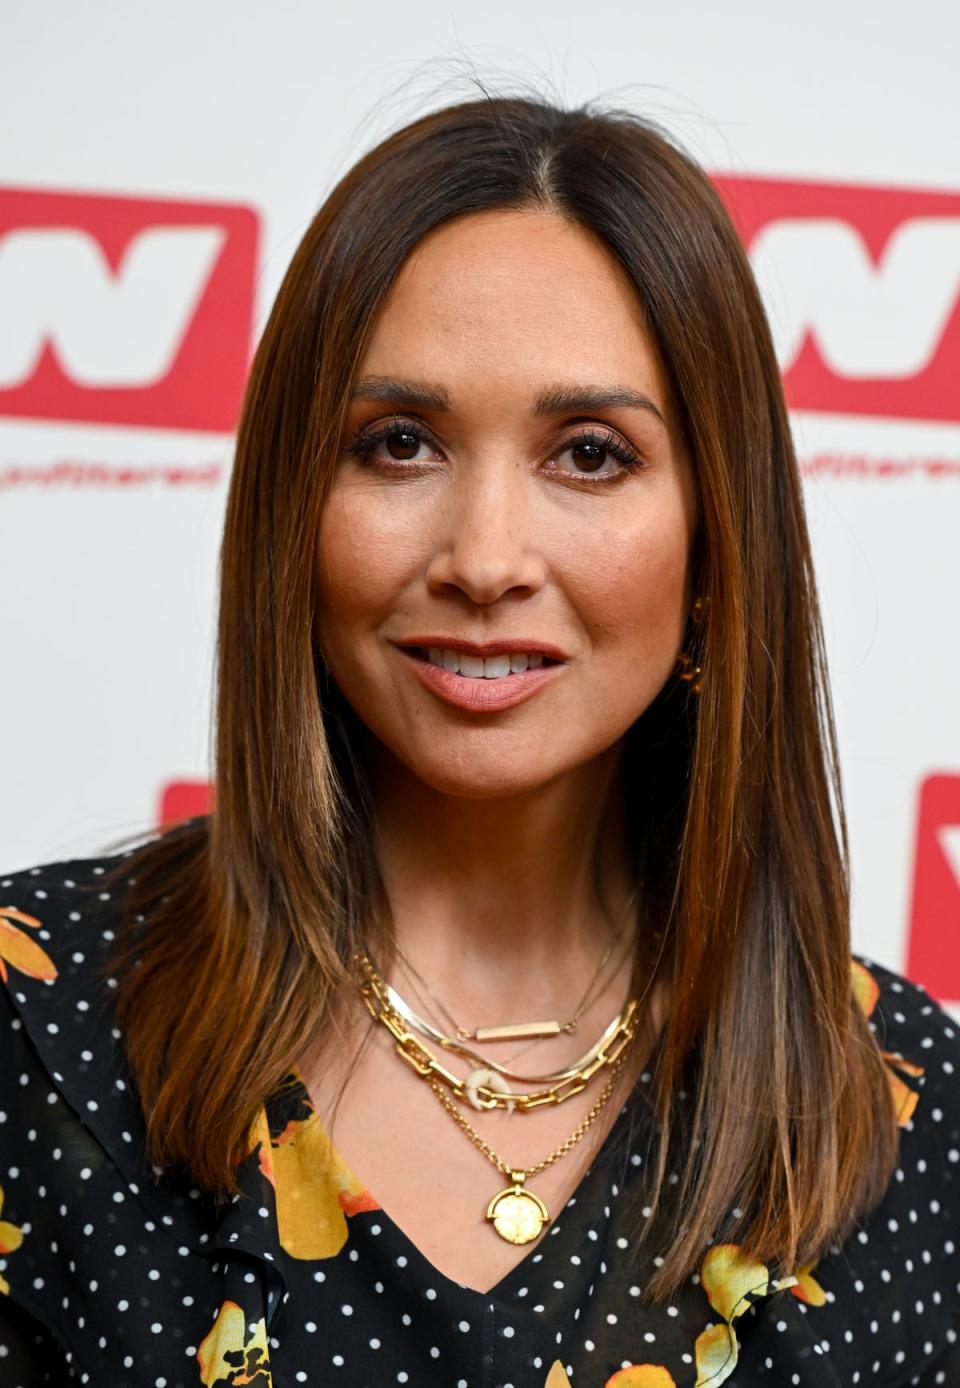 Myleene Klass has previously opened up about suffering four devastating miscarriages (Getty Images)